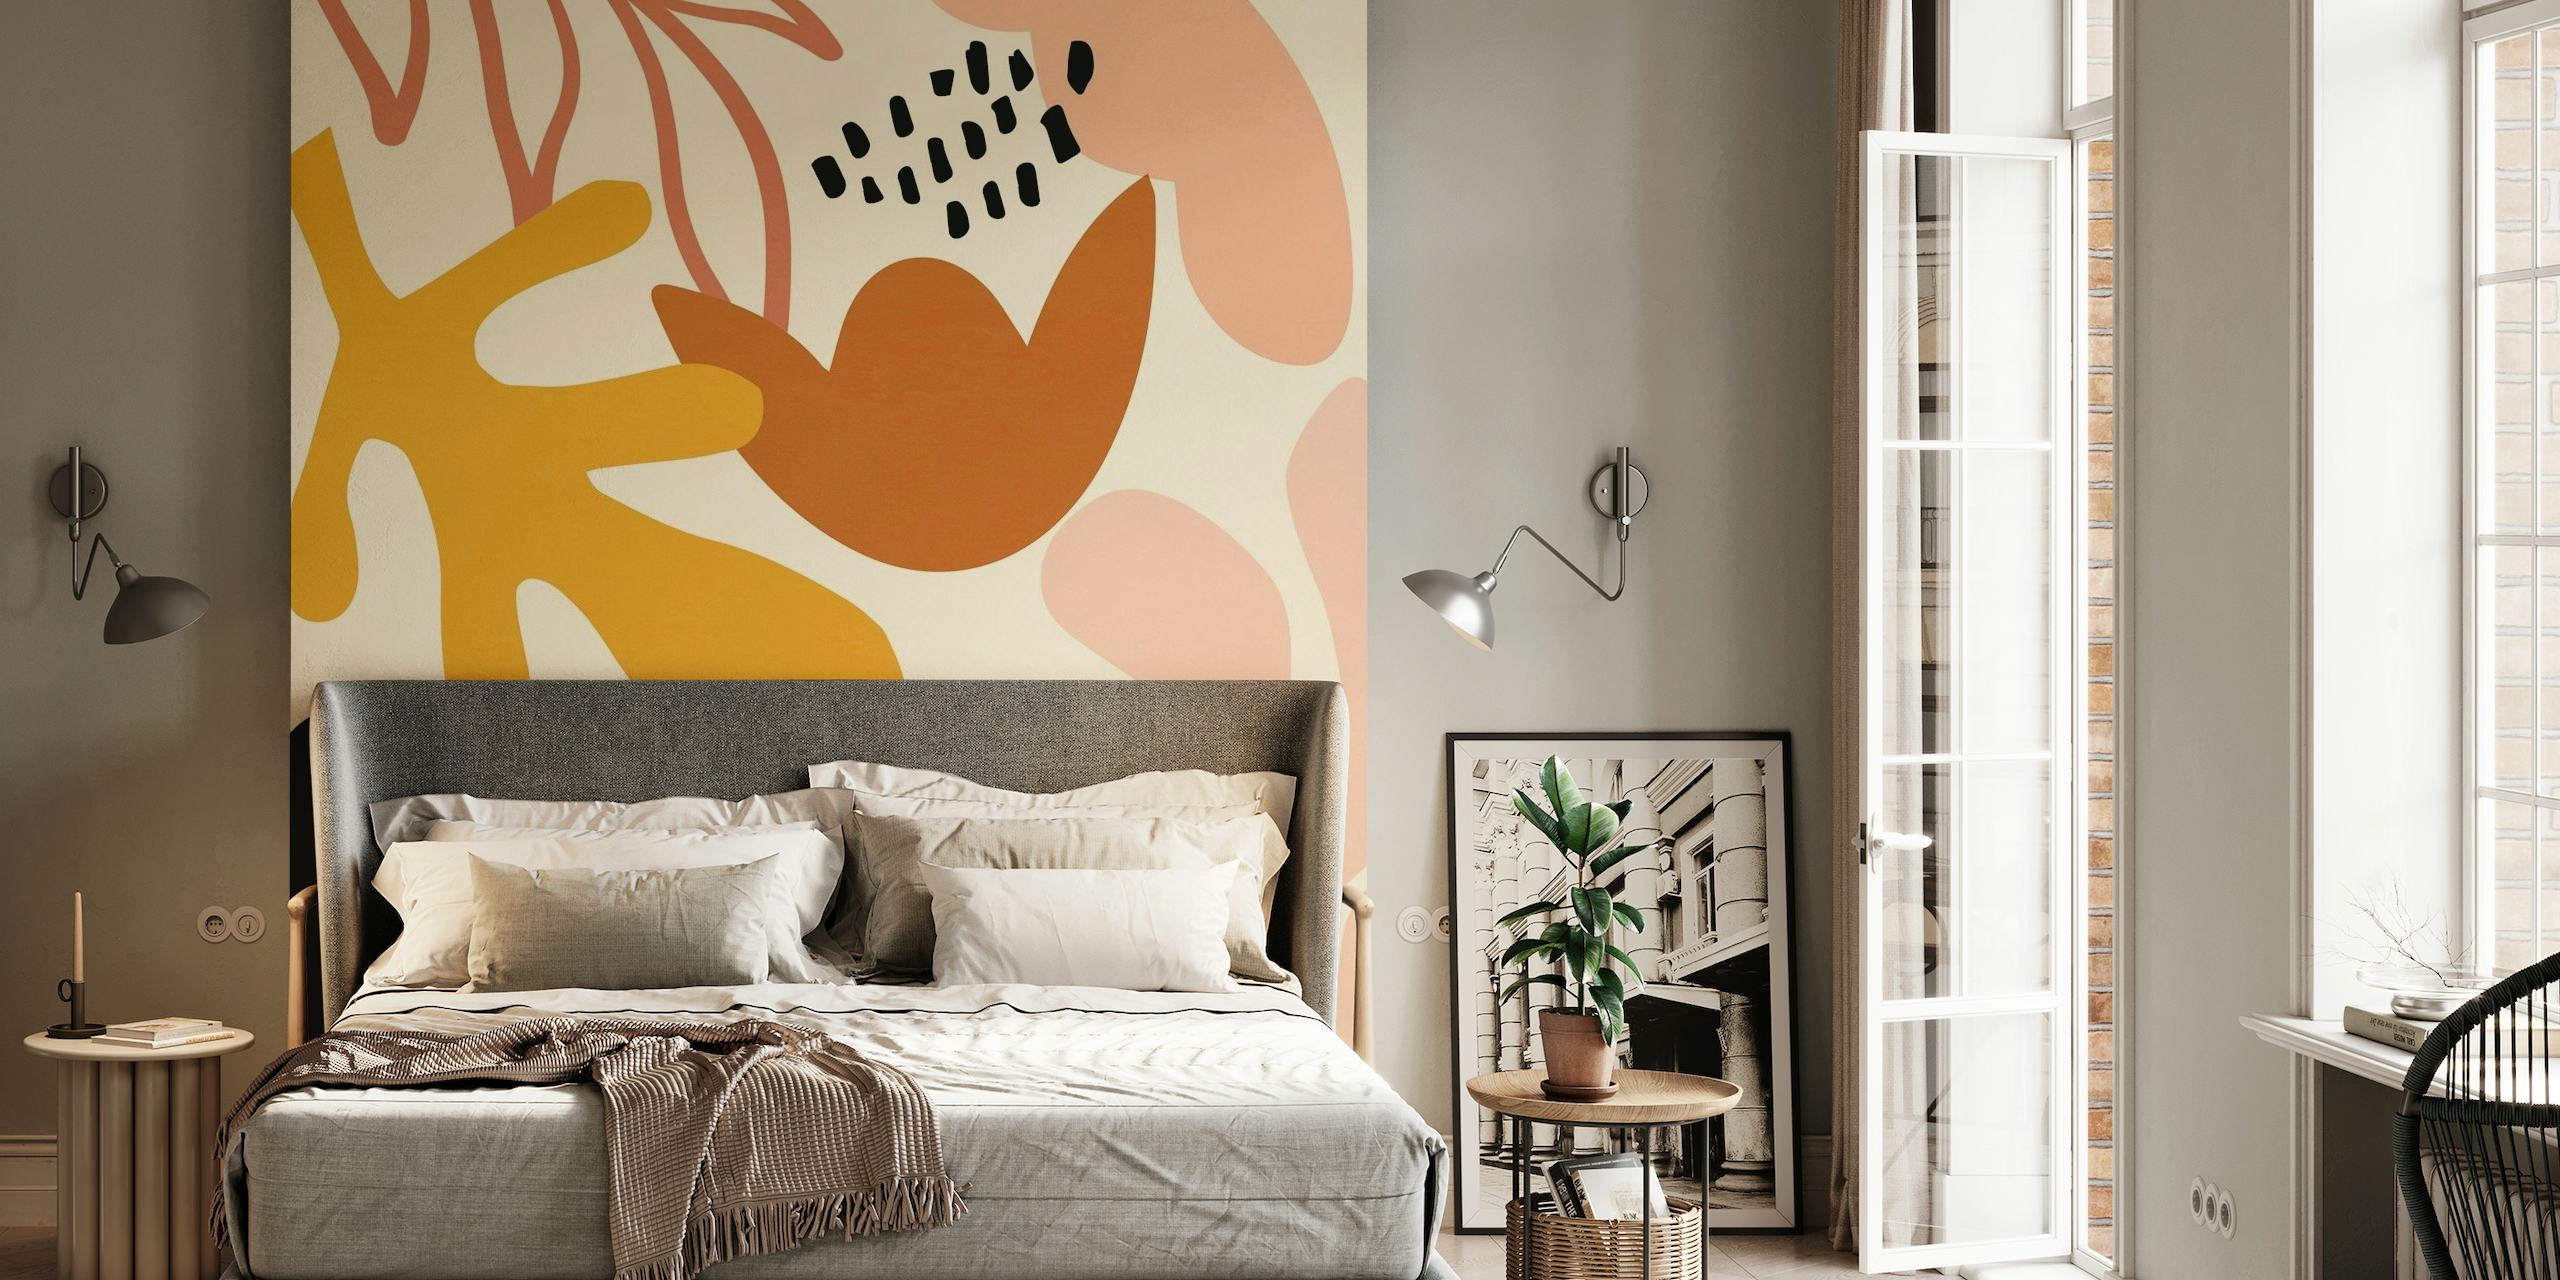 Abstract autumn-themed wall mural with modern shapes in burnt orange, mustard yellow, and deep black on a pastel background.